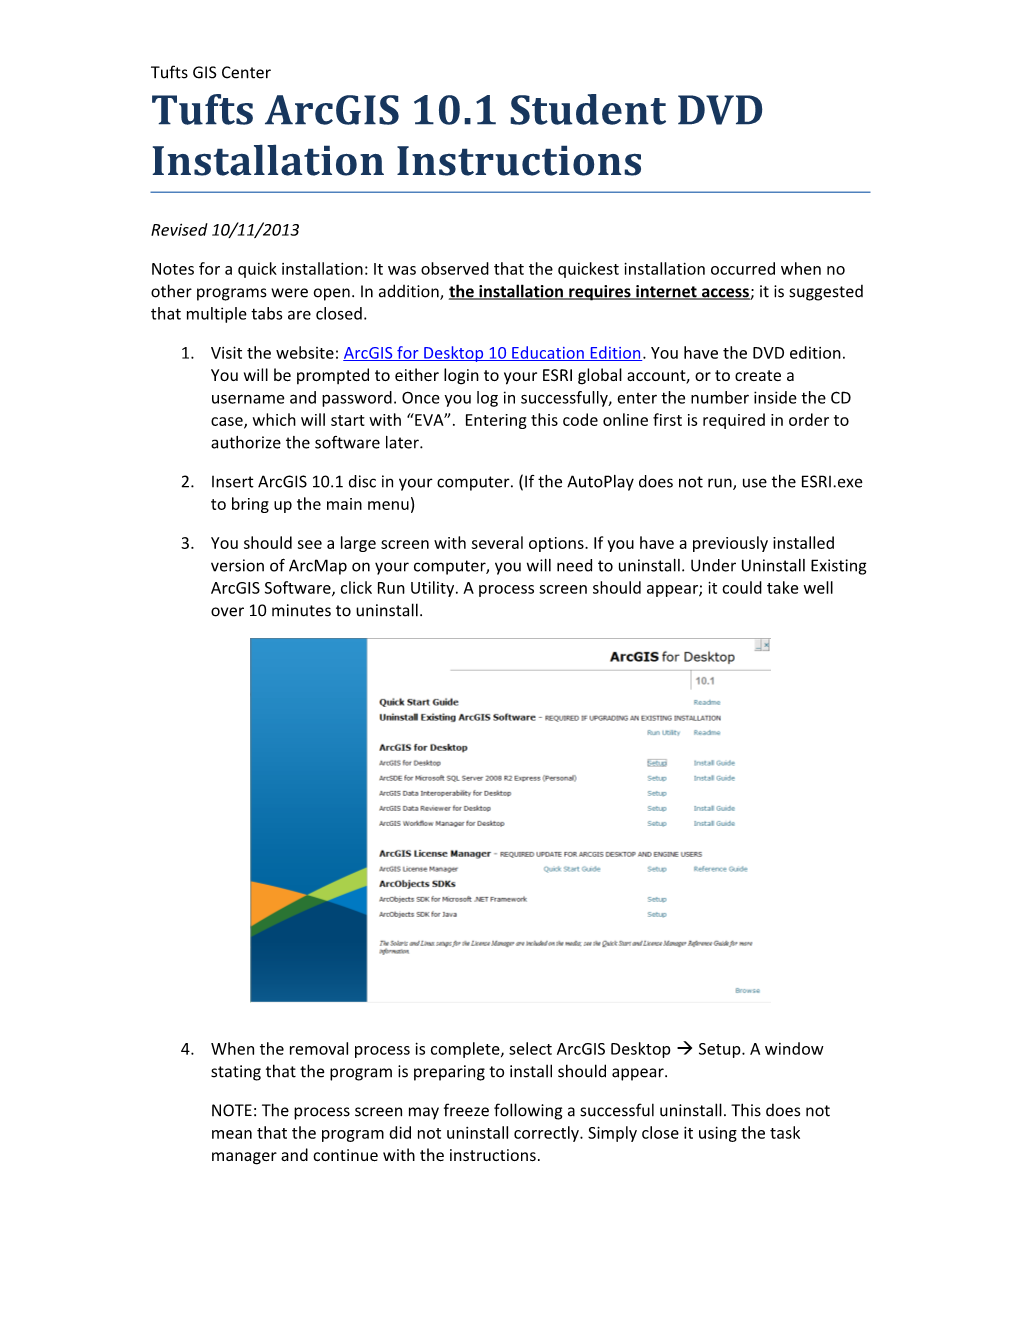 Tufts Arcgis 10.1 Student DVD Installation Instructions